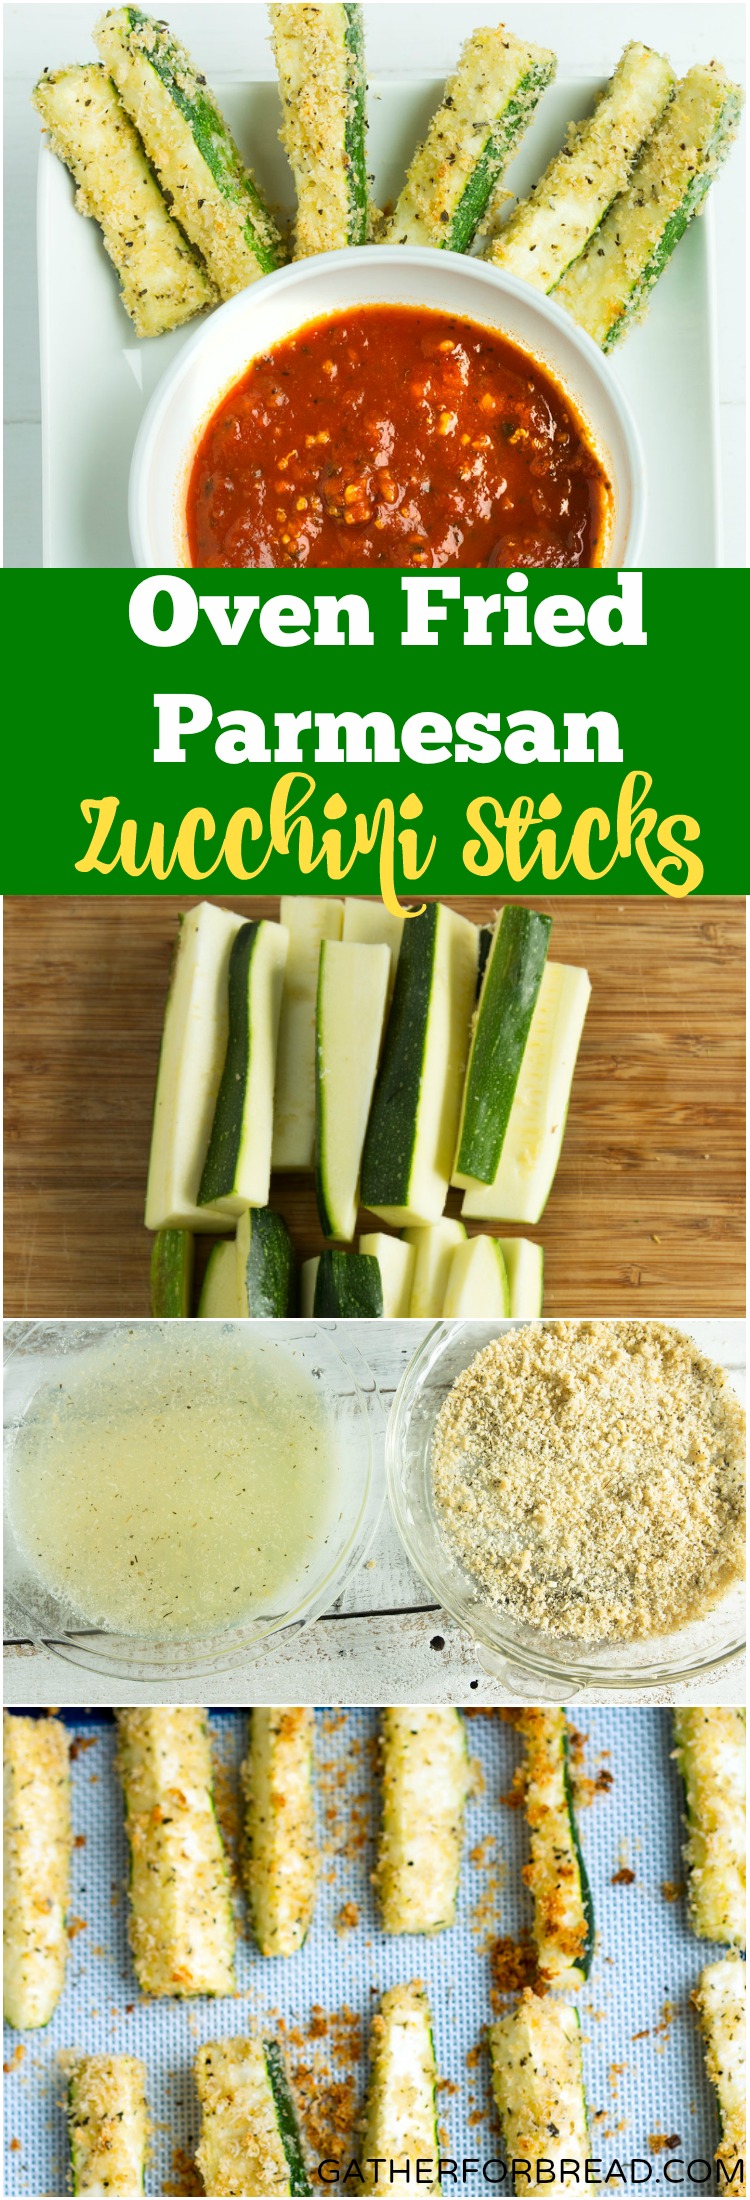 Oven Fried Parmesan Zucchini Sticks - Crunchy zucchini sticks coated with Parmesan cheese and a breadcrumb topping and baked for less fat. Perfect side dish or appetizer for summer!